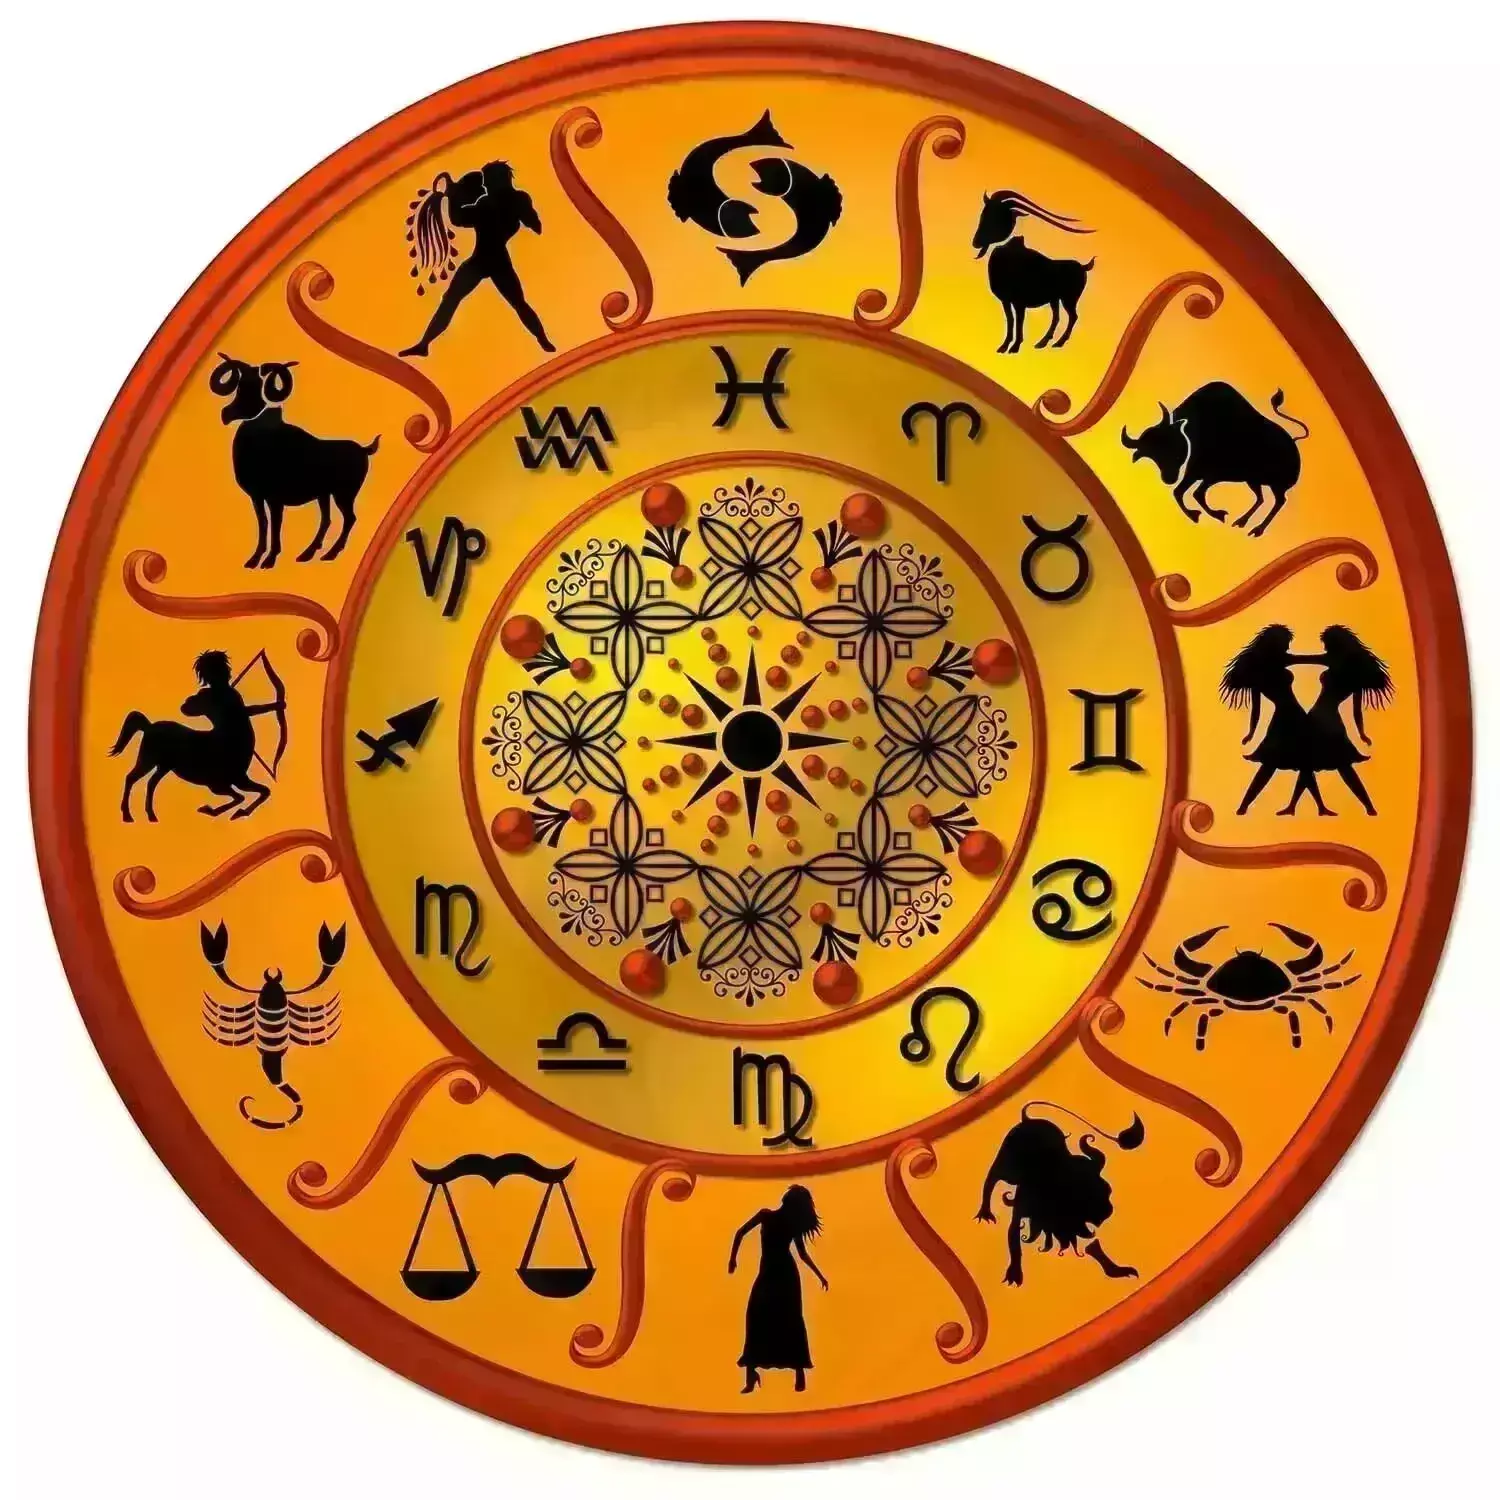 22 January – Know your todays horoscope